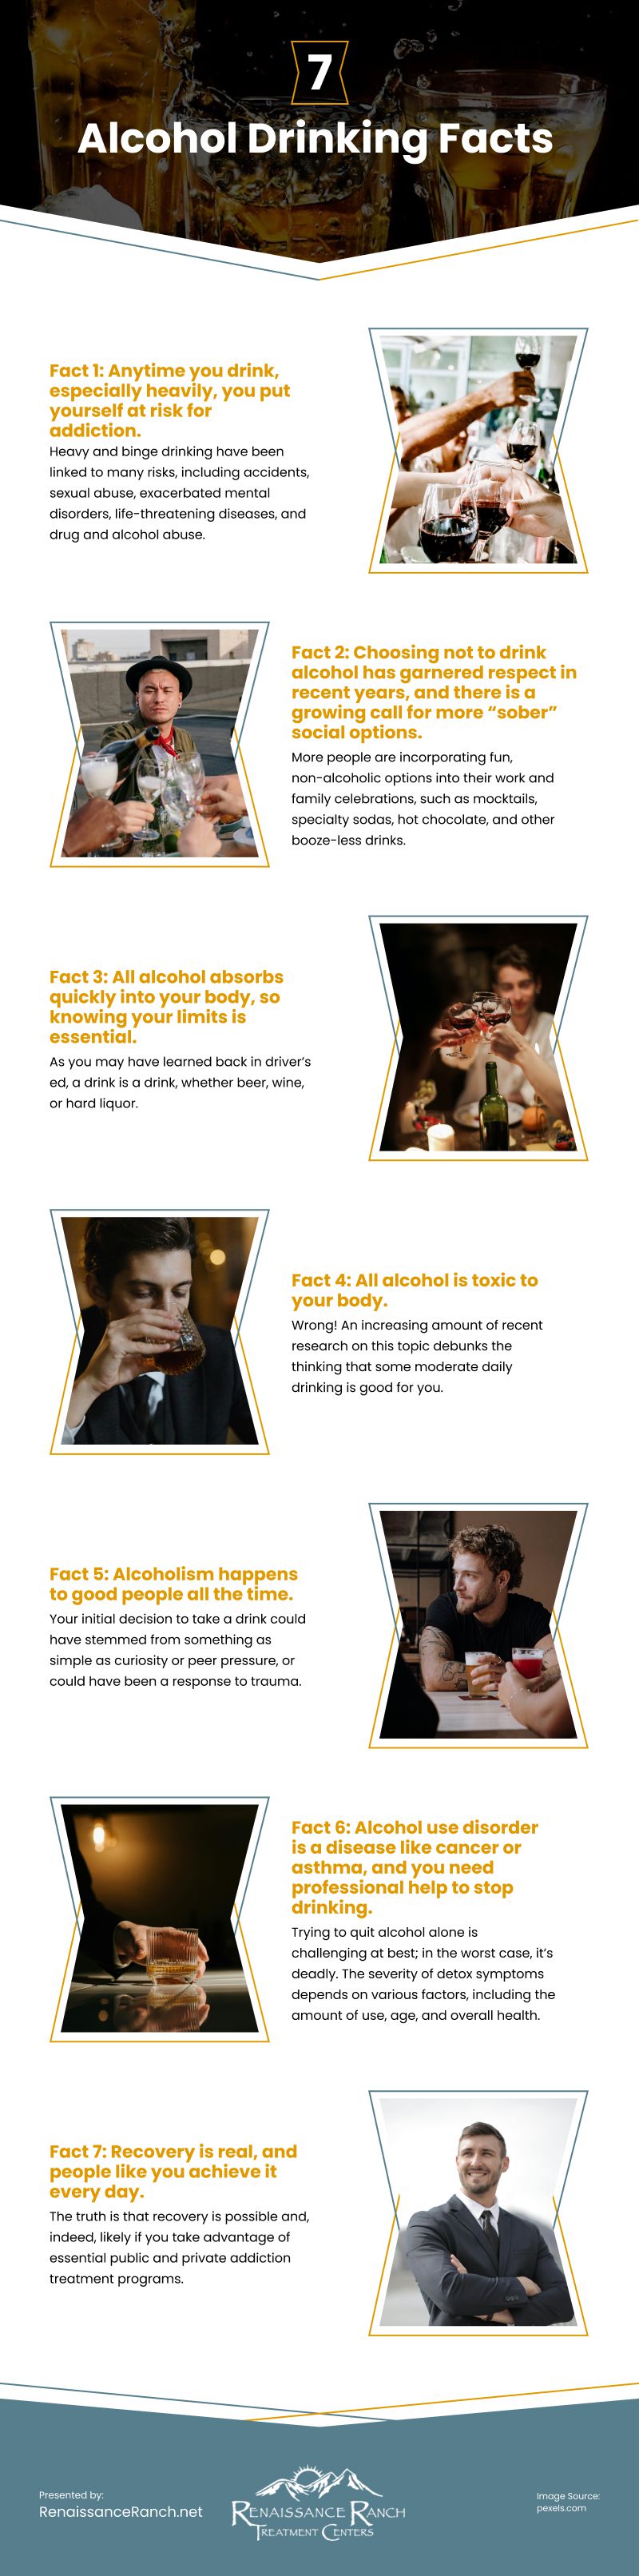 7 Alcohol Drinking Facts Infographic